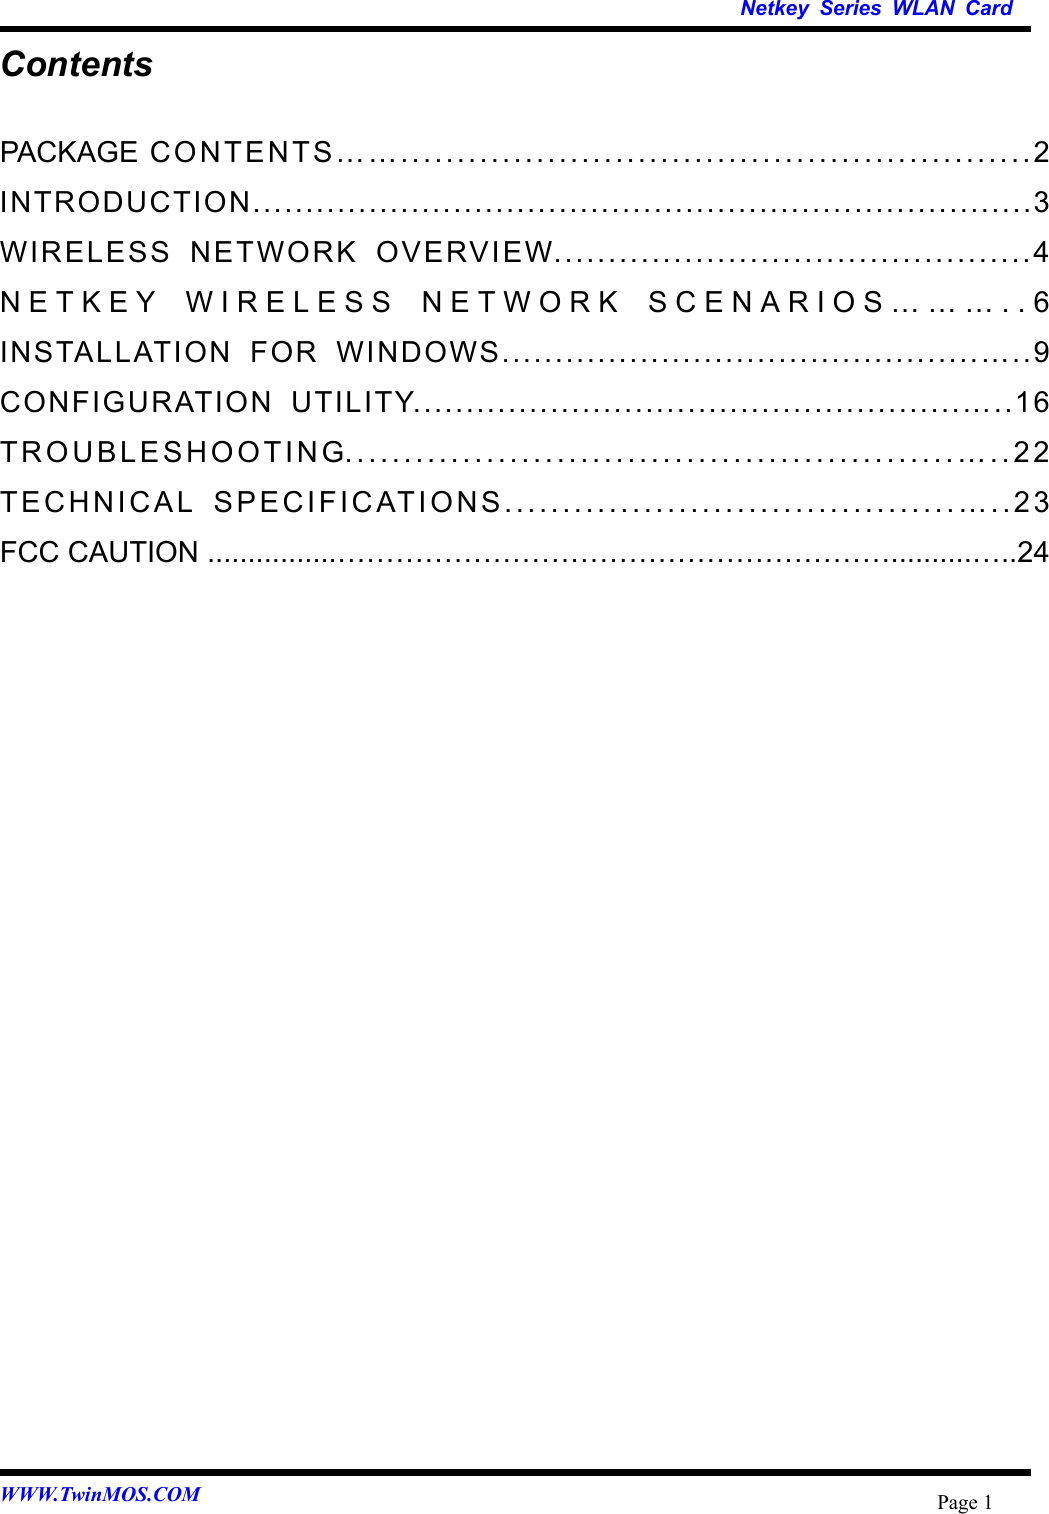   Netkey Series WLAN Card WWW.TwinMOS.COM  Page 1Contents PACKAGE CONTENTS……........................................................2 INTRODUCTION..........................................................................3 WIRELESS NETWORK OVERVIEW............................................4 NETKEY WIRELESS NETWORK SCENARIOS………..6 INSTALLATION FOR WINDOWS.............................................…..9 CONFIGURATION UTILITY....................................................…..16 TROUBLESHOOTING....................................................…..22 TECHNICAL SPECIFICATIONS.......................................…..23 FCC CAUTION ................…………………………………………………..........…..24  